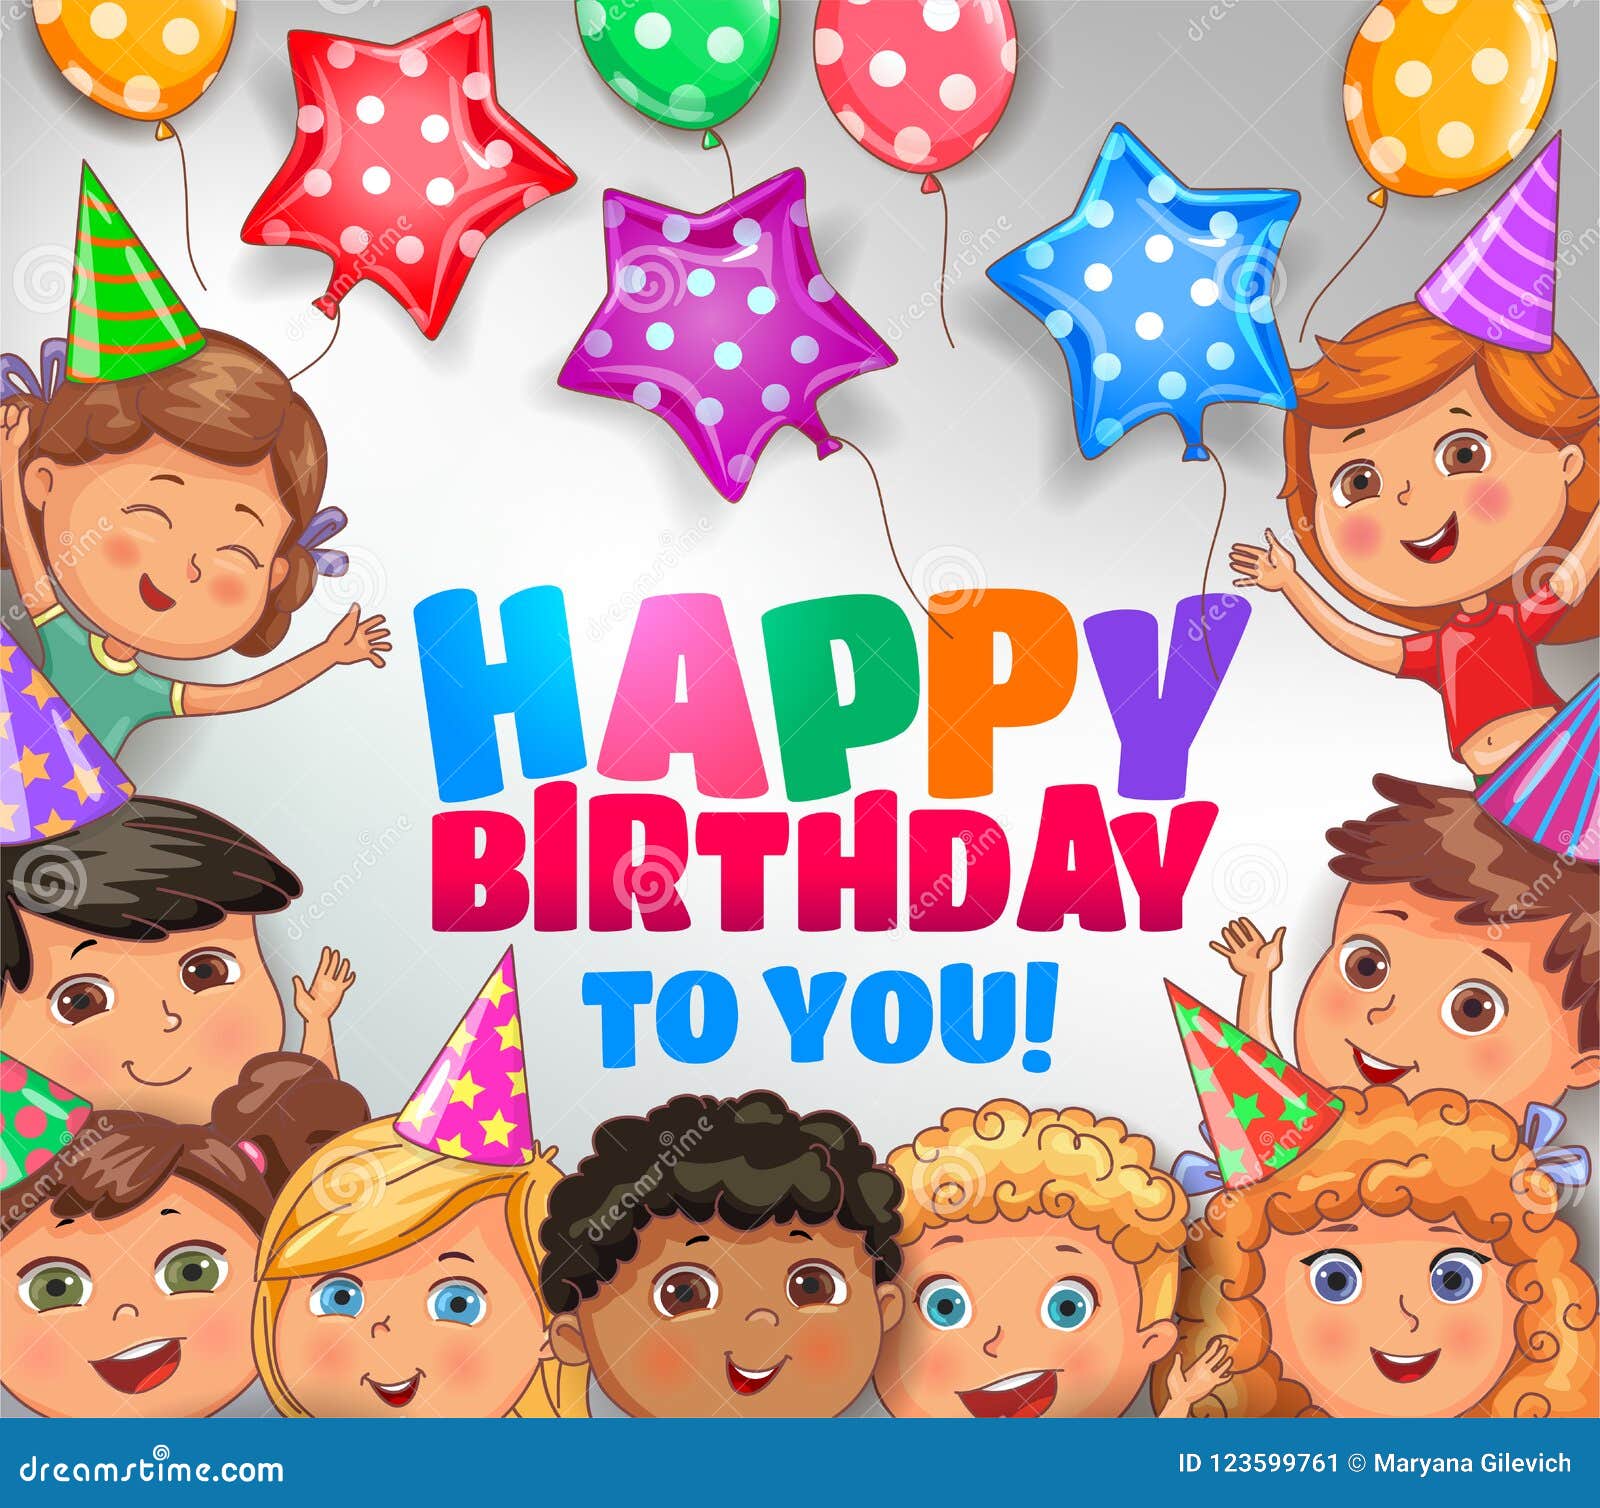 Happy Birthday To You Bright Design with Cute Children Stock Vector - Illustration of celebration, holding: 123599761